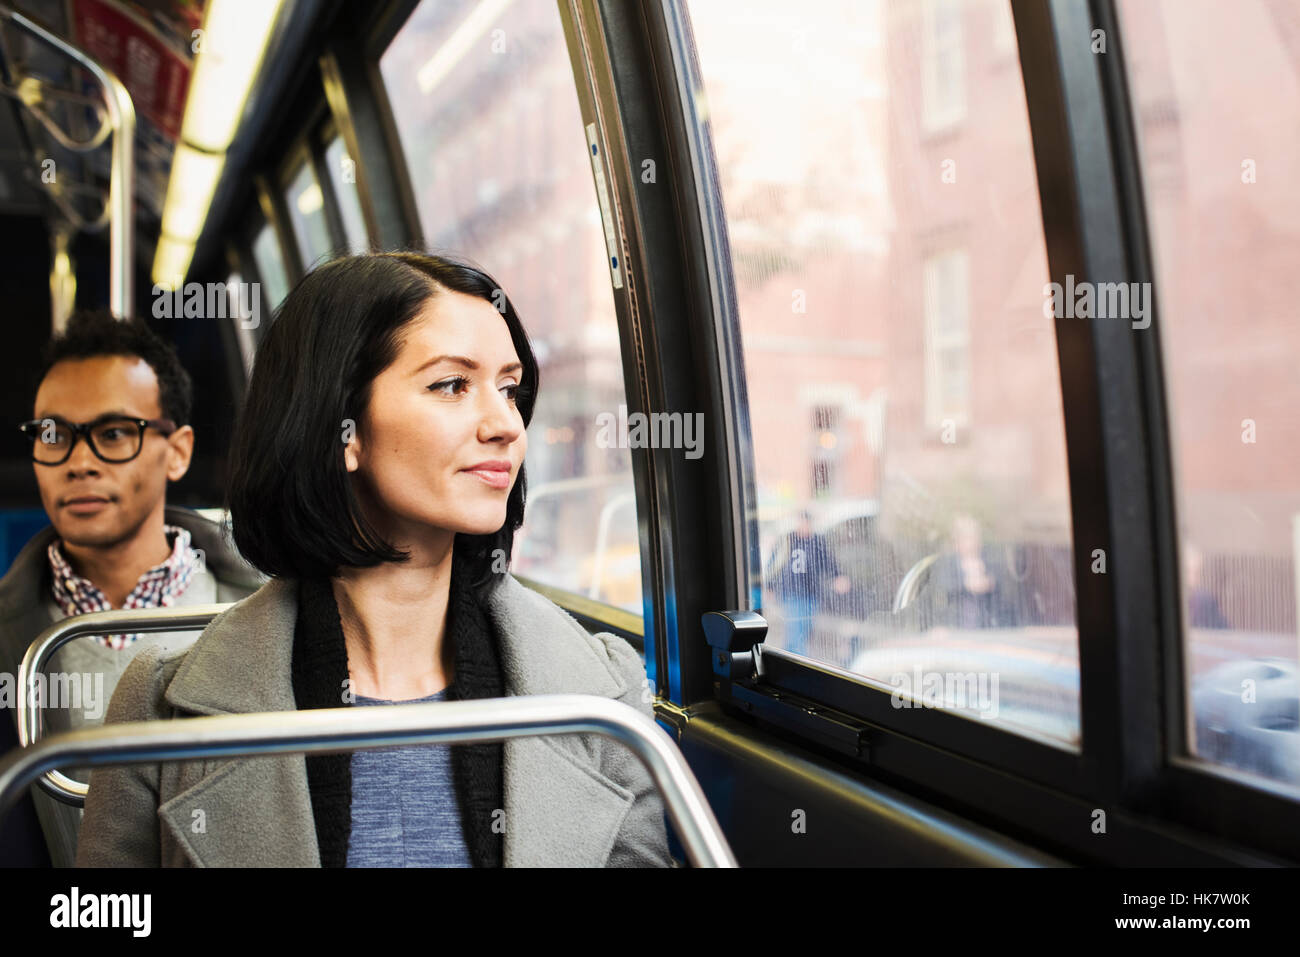 A young woman sitting on a train looking out of the window at an urban landscape, with a man sitting behind her looking away. Stock Photo